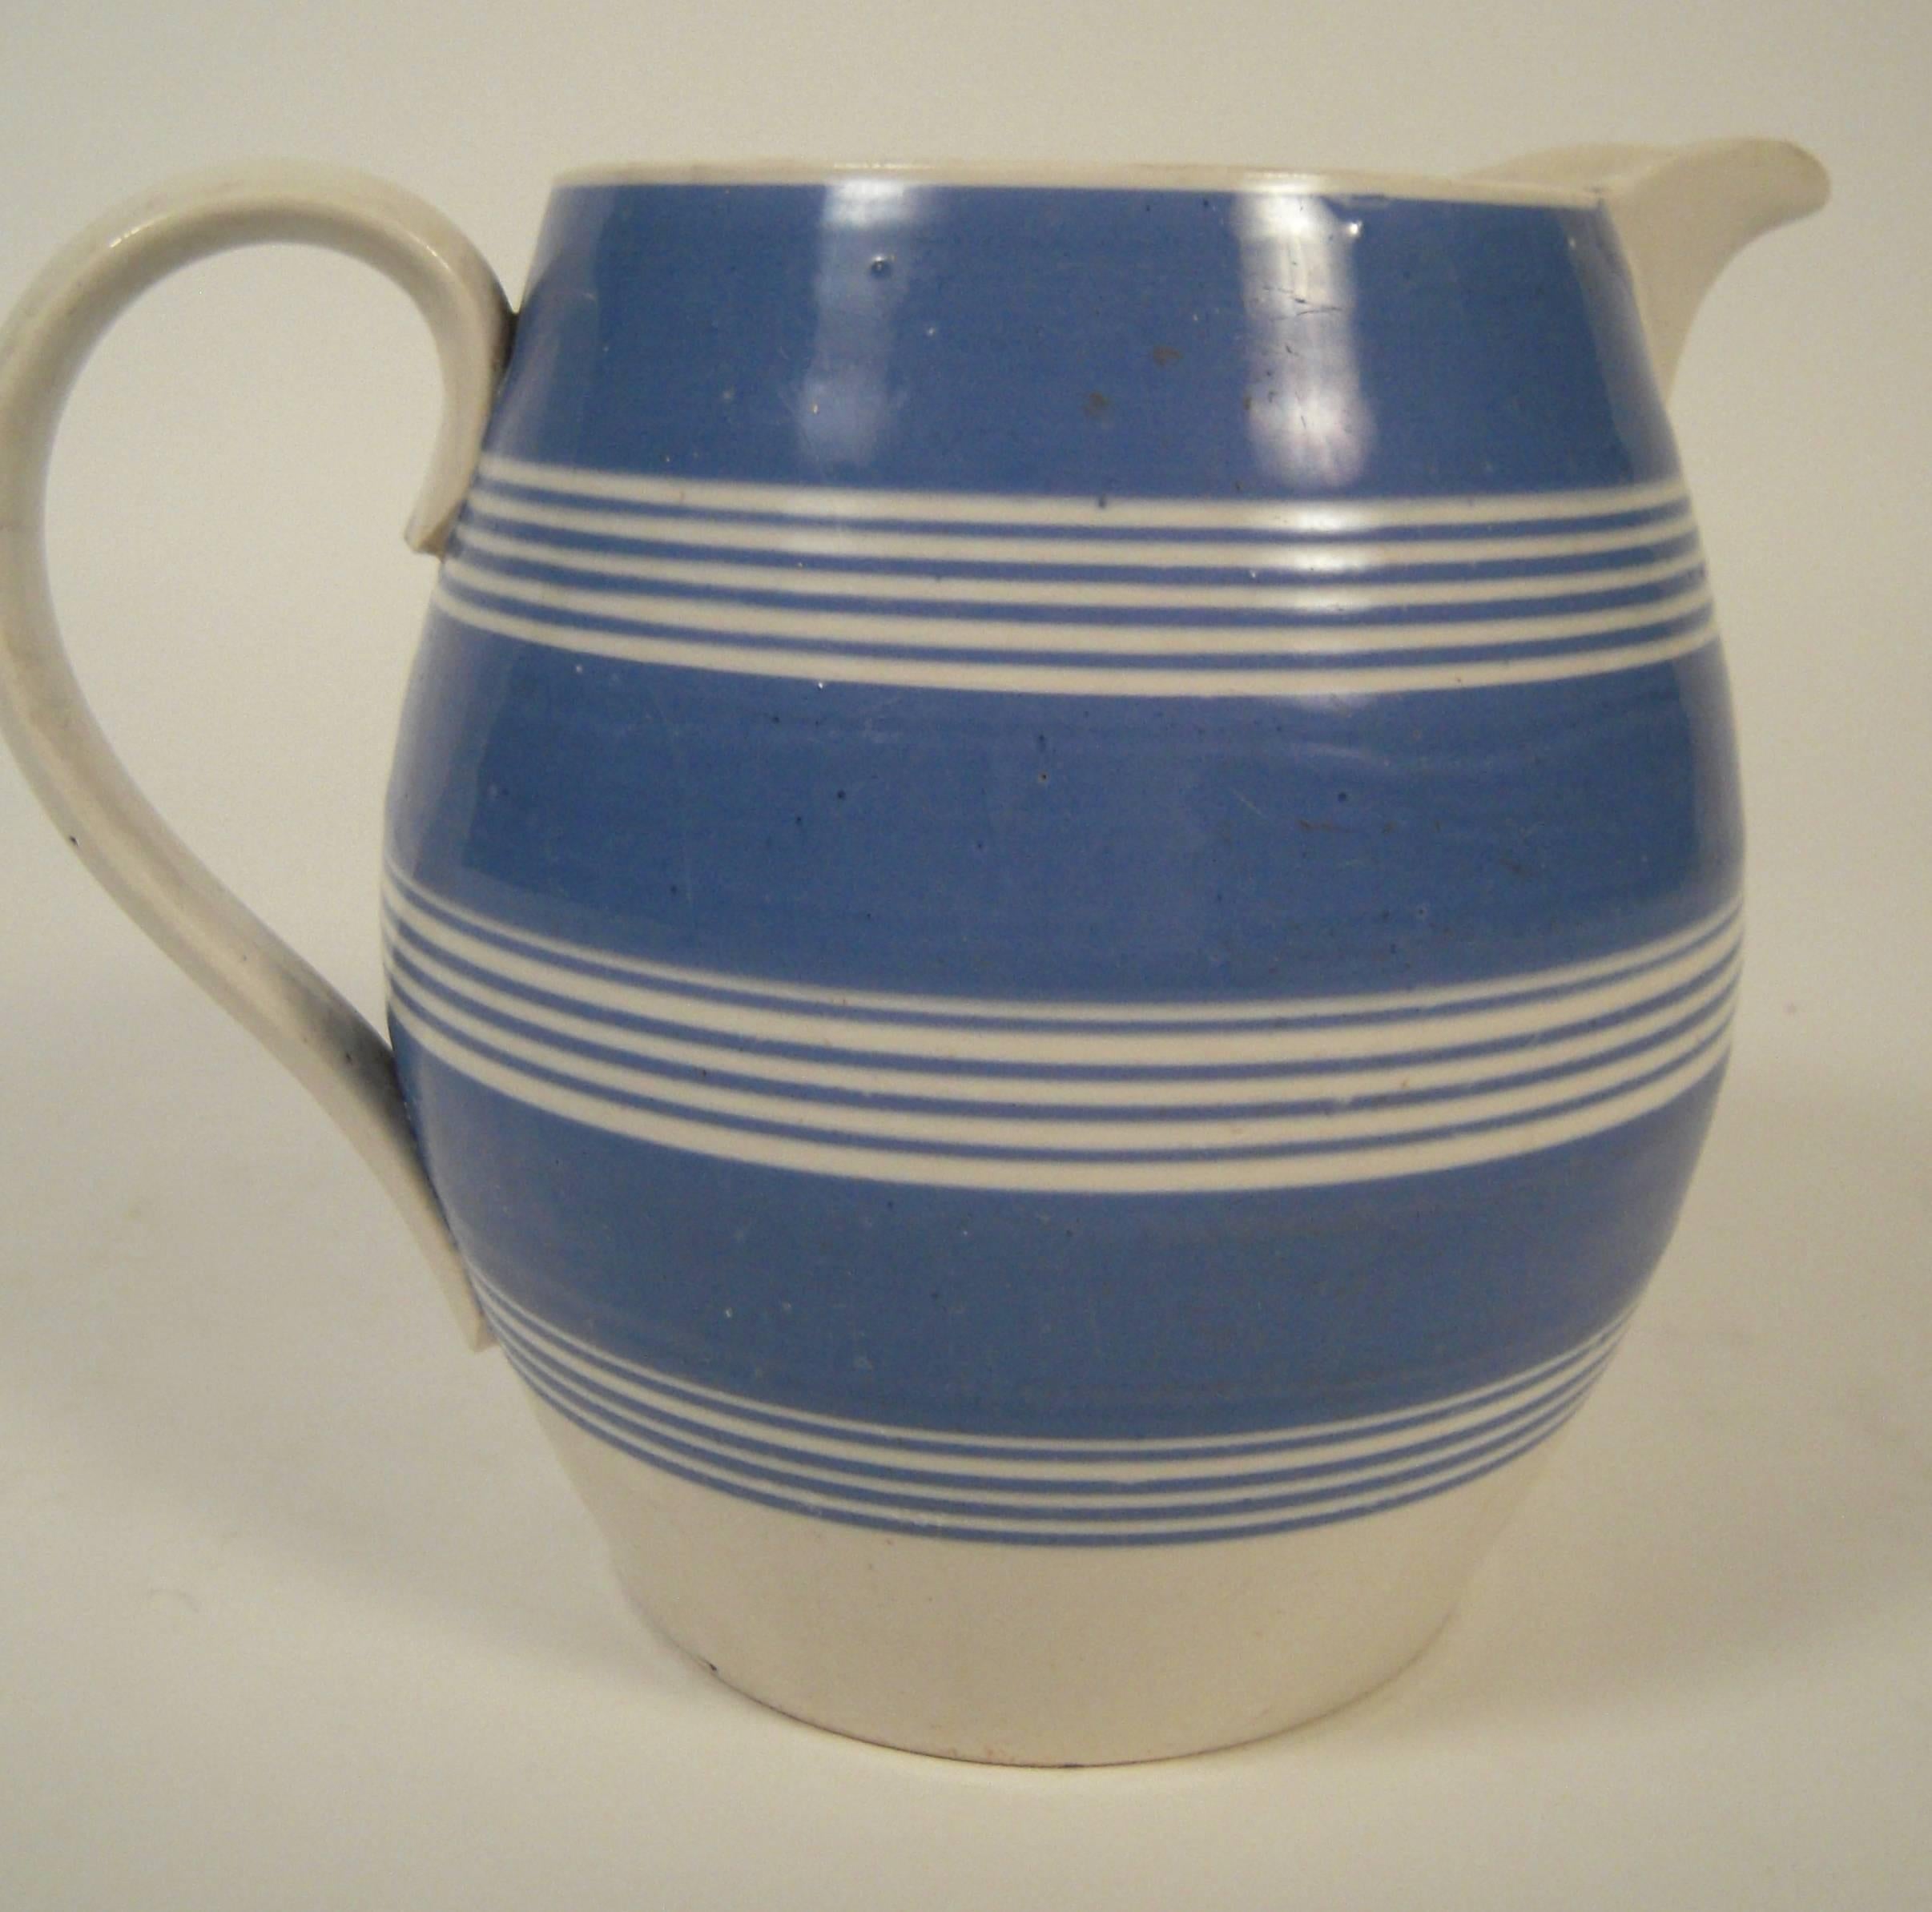 Great Britain (UK) Large Blue and White Striped Mochaware Pitcher